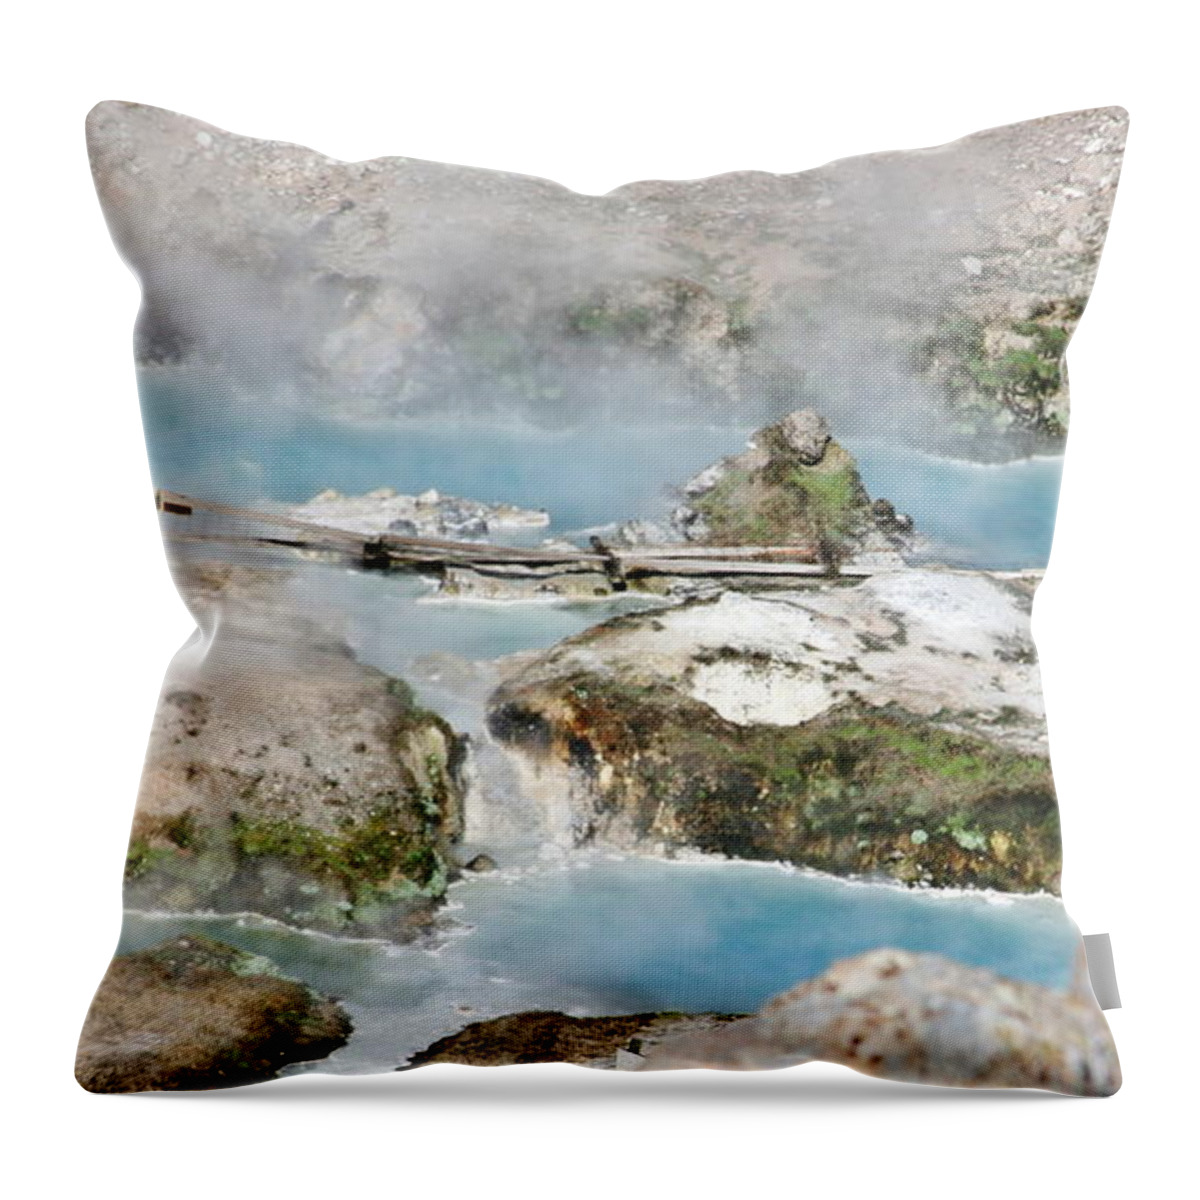 Hot Creek Throw Pillow featuring the photograph Depths Of Hell by Marilyn Diaz